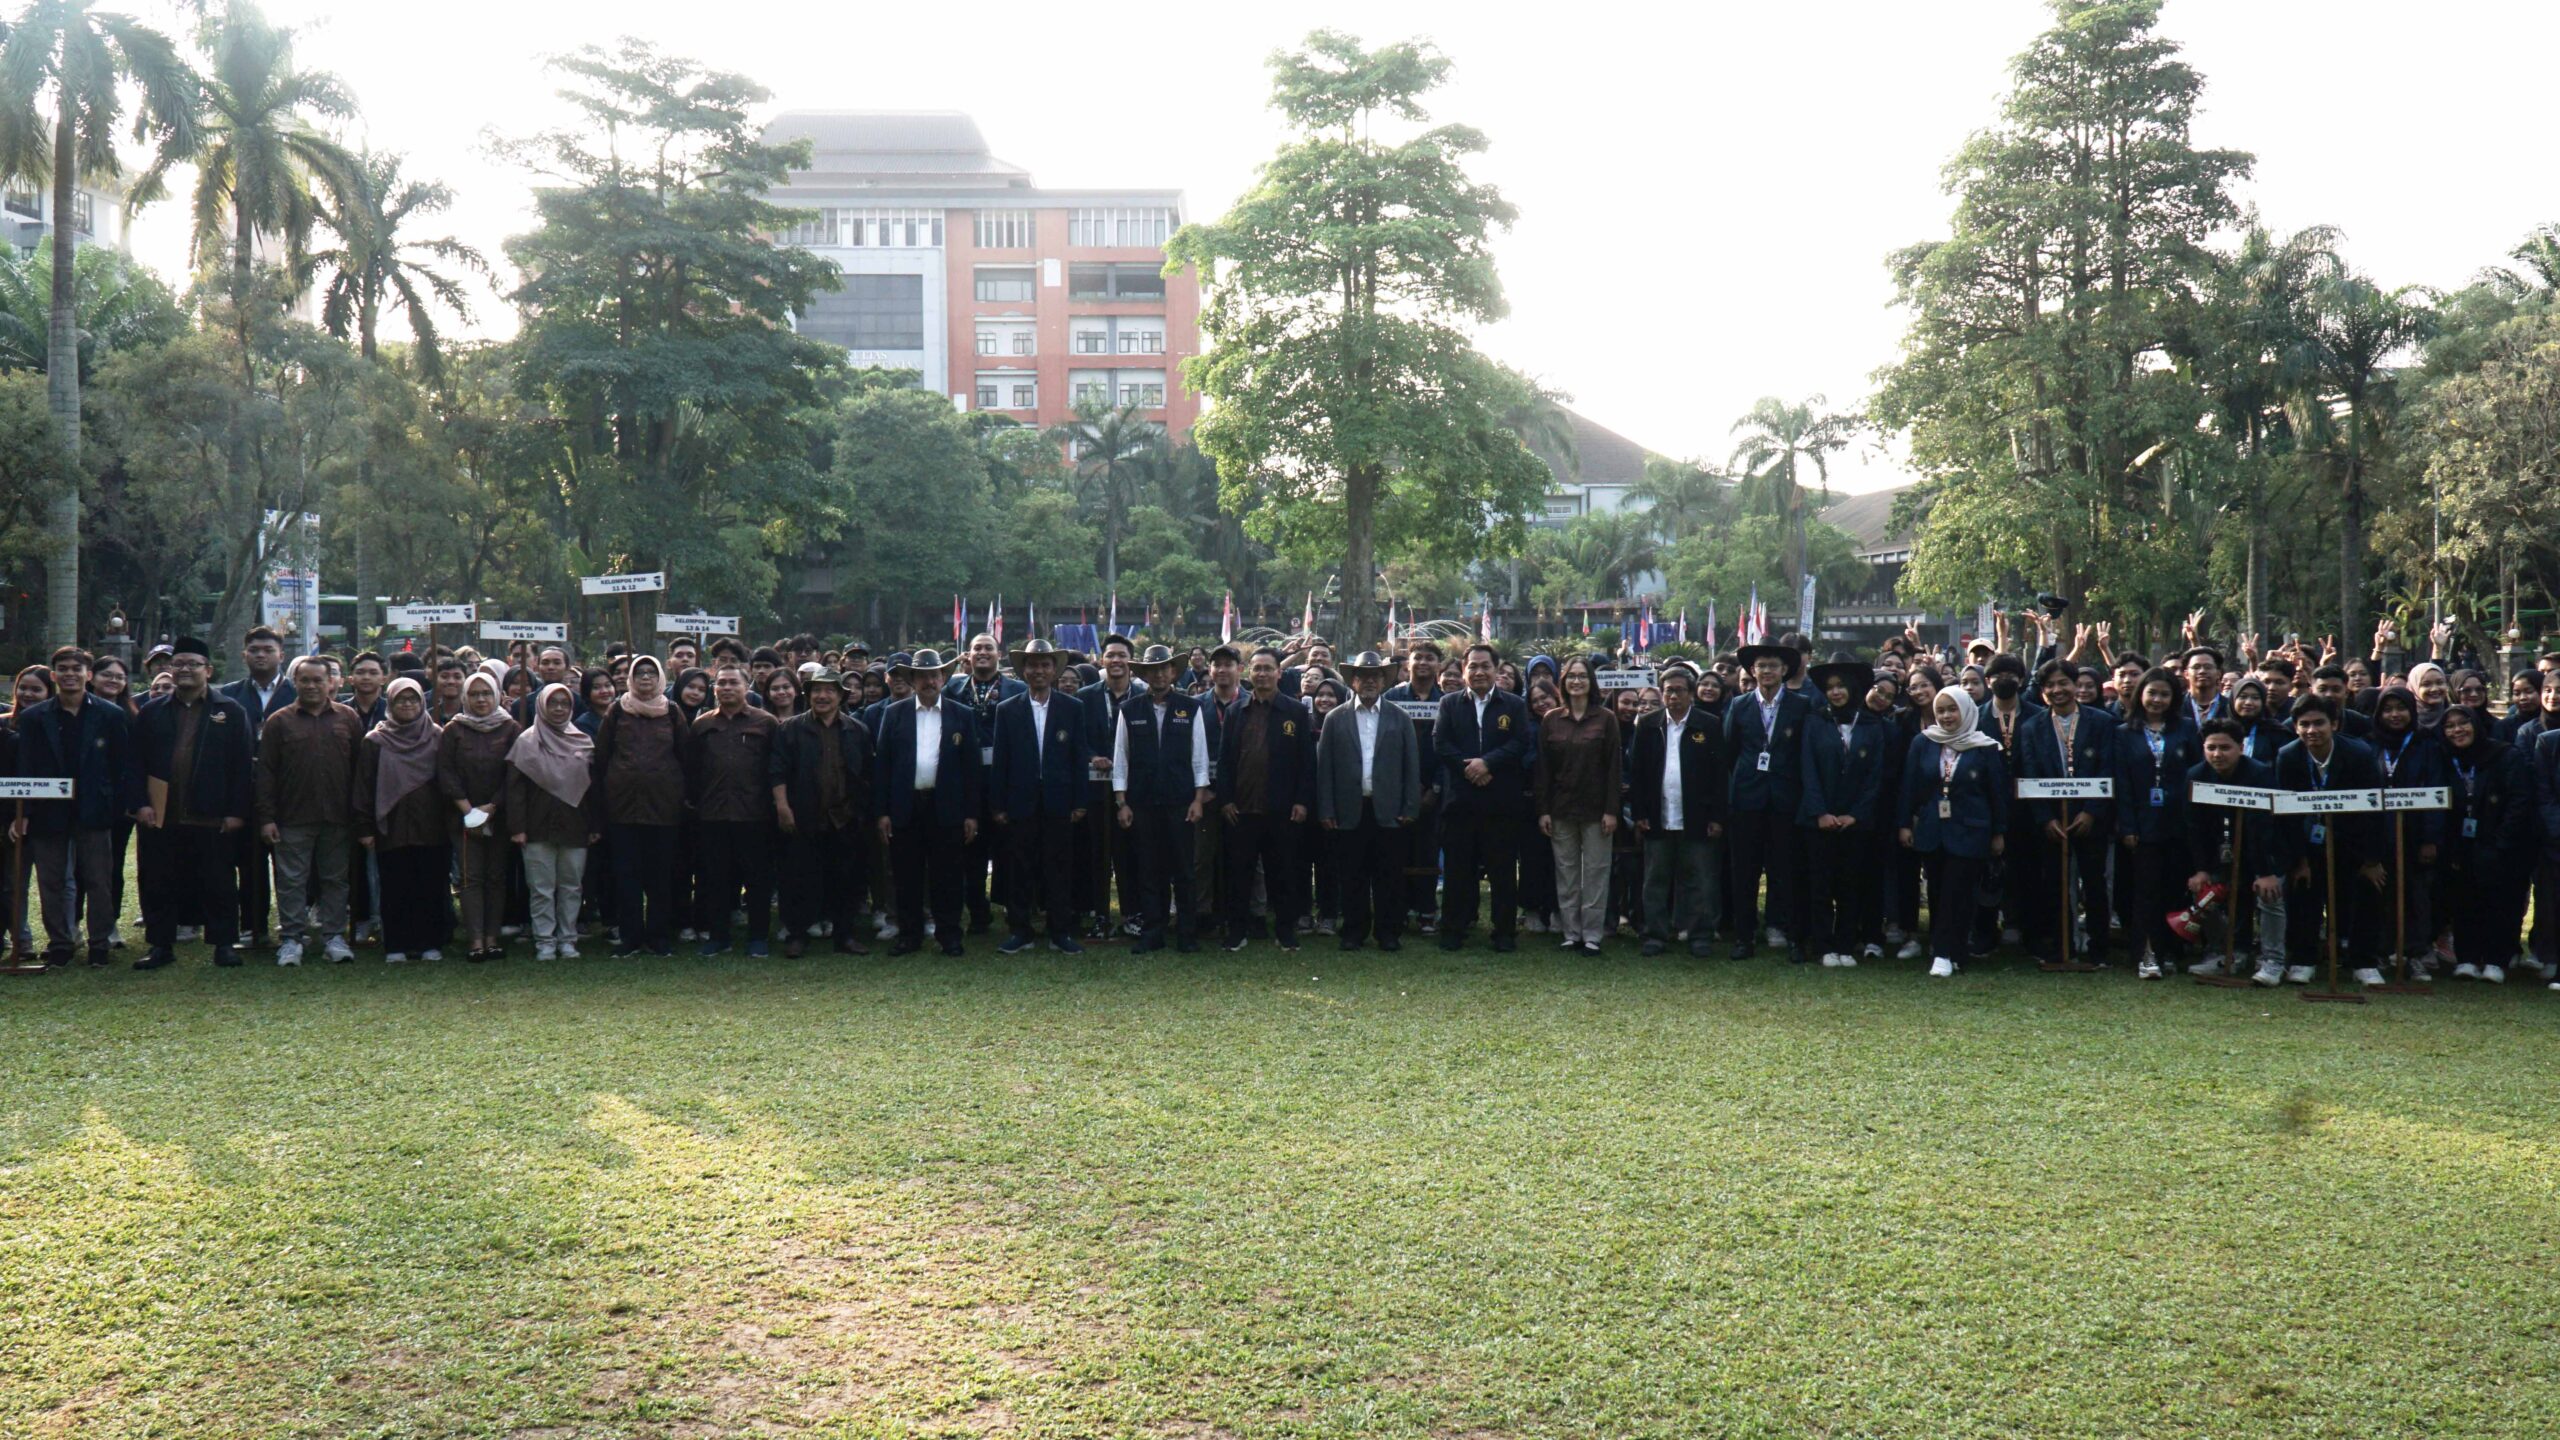 567 FAPET Universitas Brawijaya Students Dispatched for Community Service in Magetan Regency by the Rector